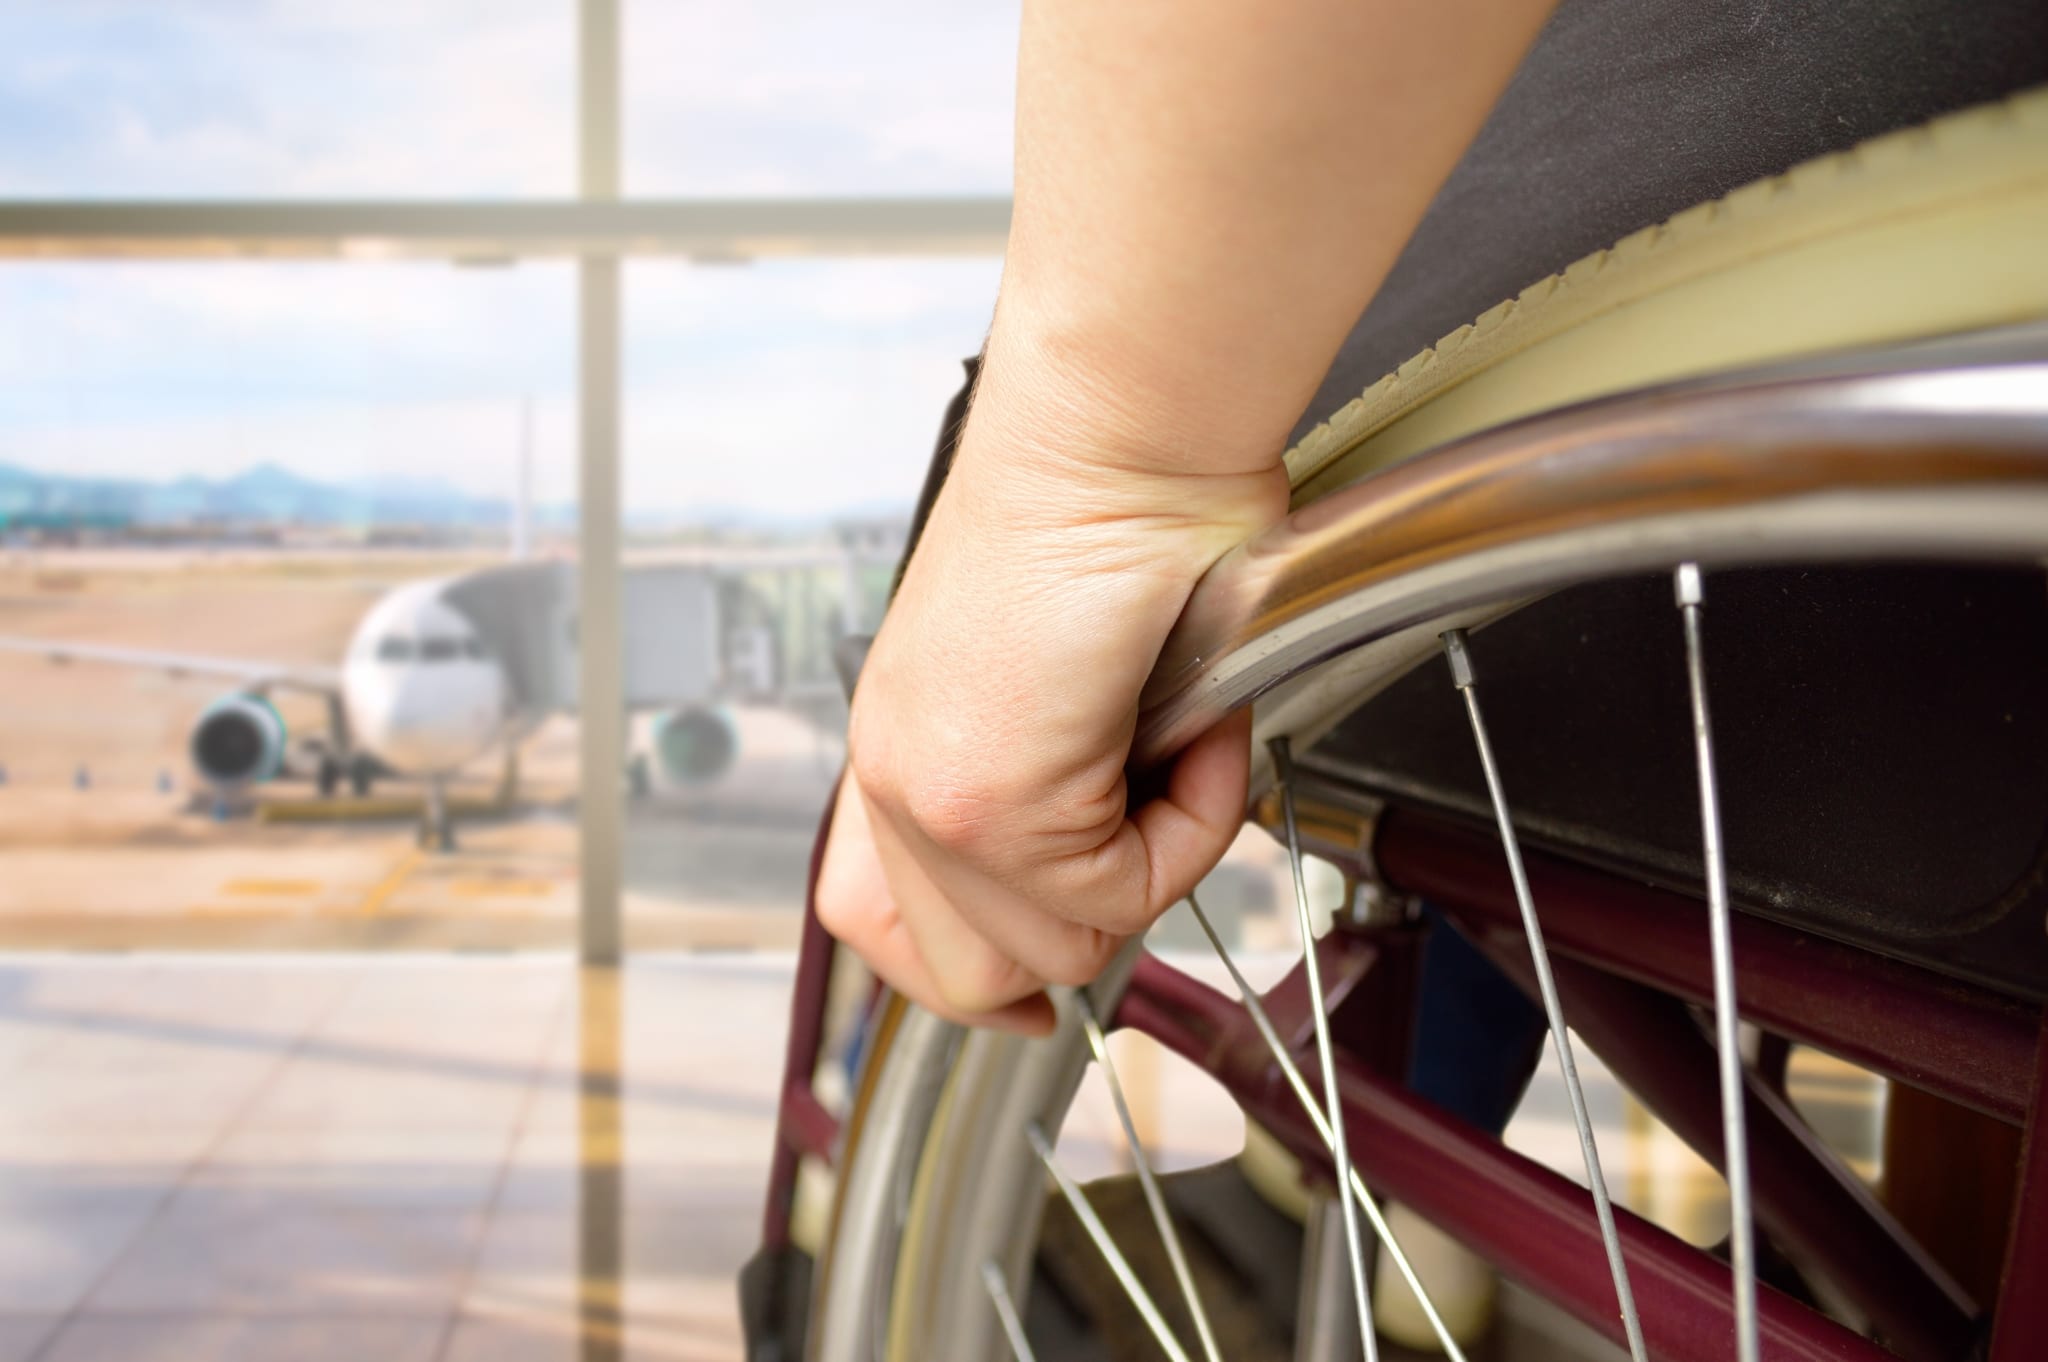 Close up of a hand on a wheel of a manual wheelchair. In the background is an airplane on a tarmac.